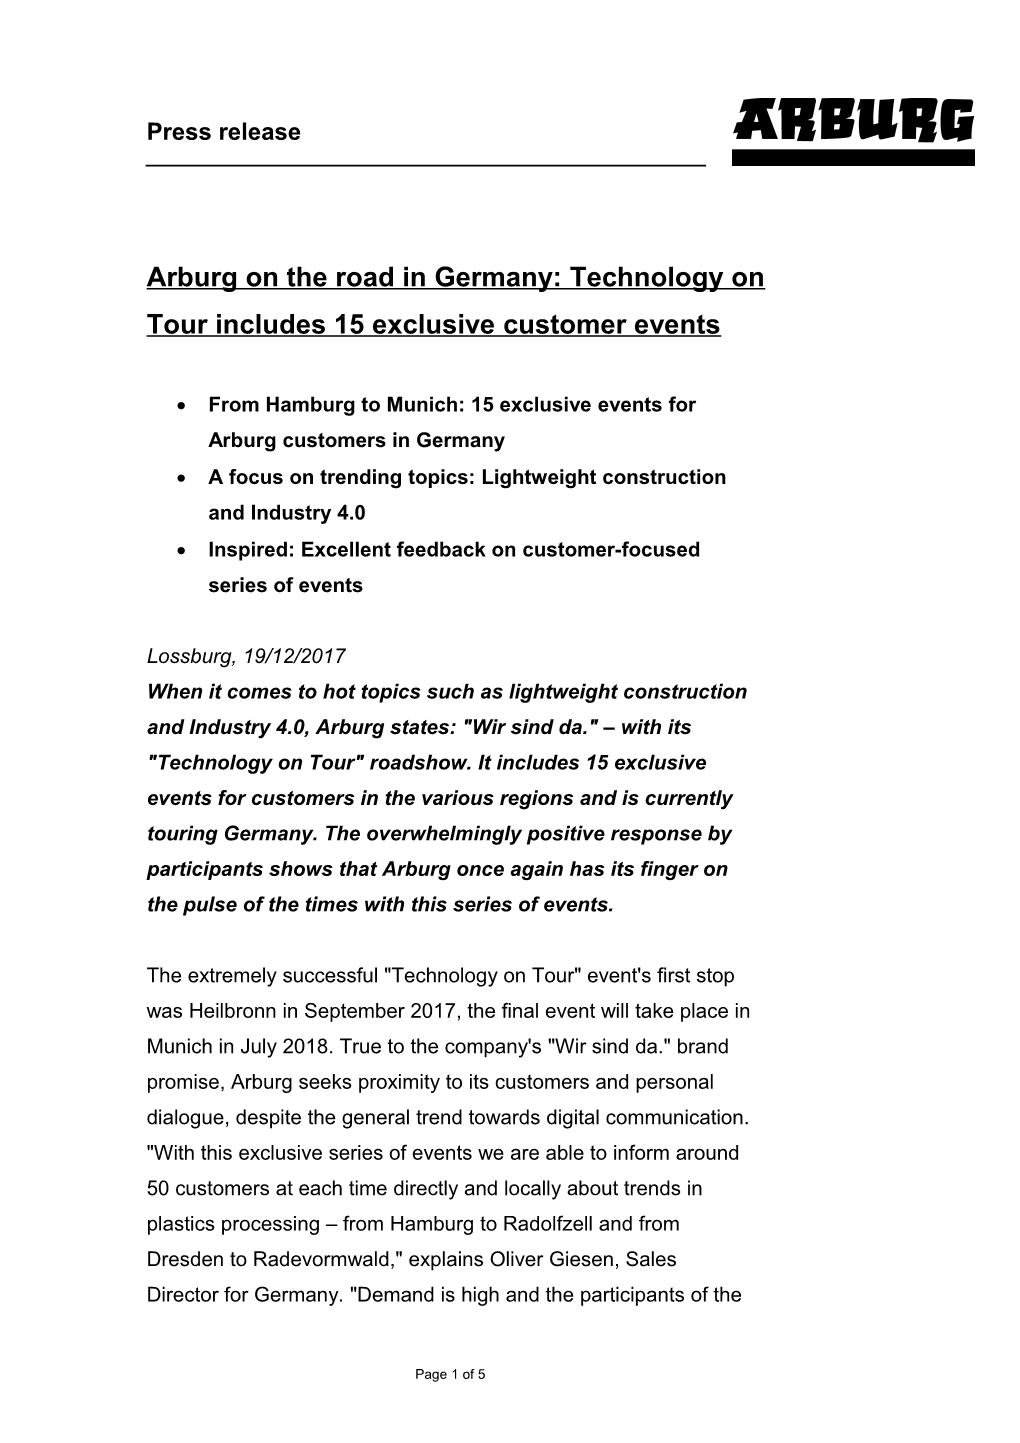 Arburg on the Road in Germany: Technology on Tour Includes 15 Exclusive Customer Events